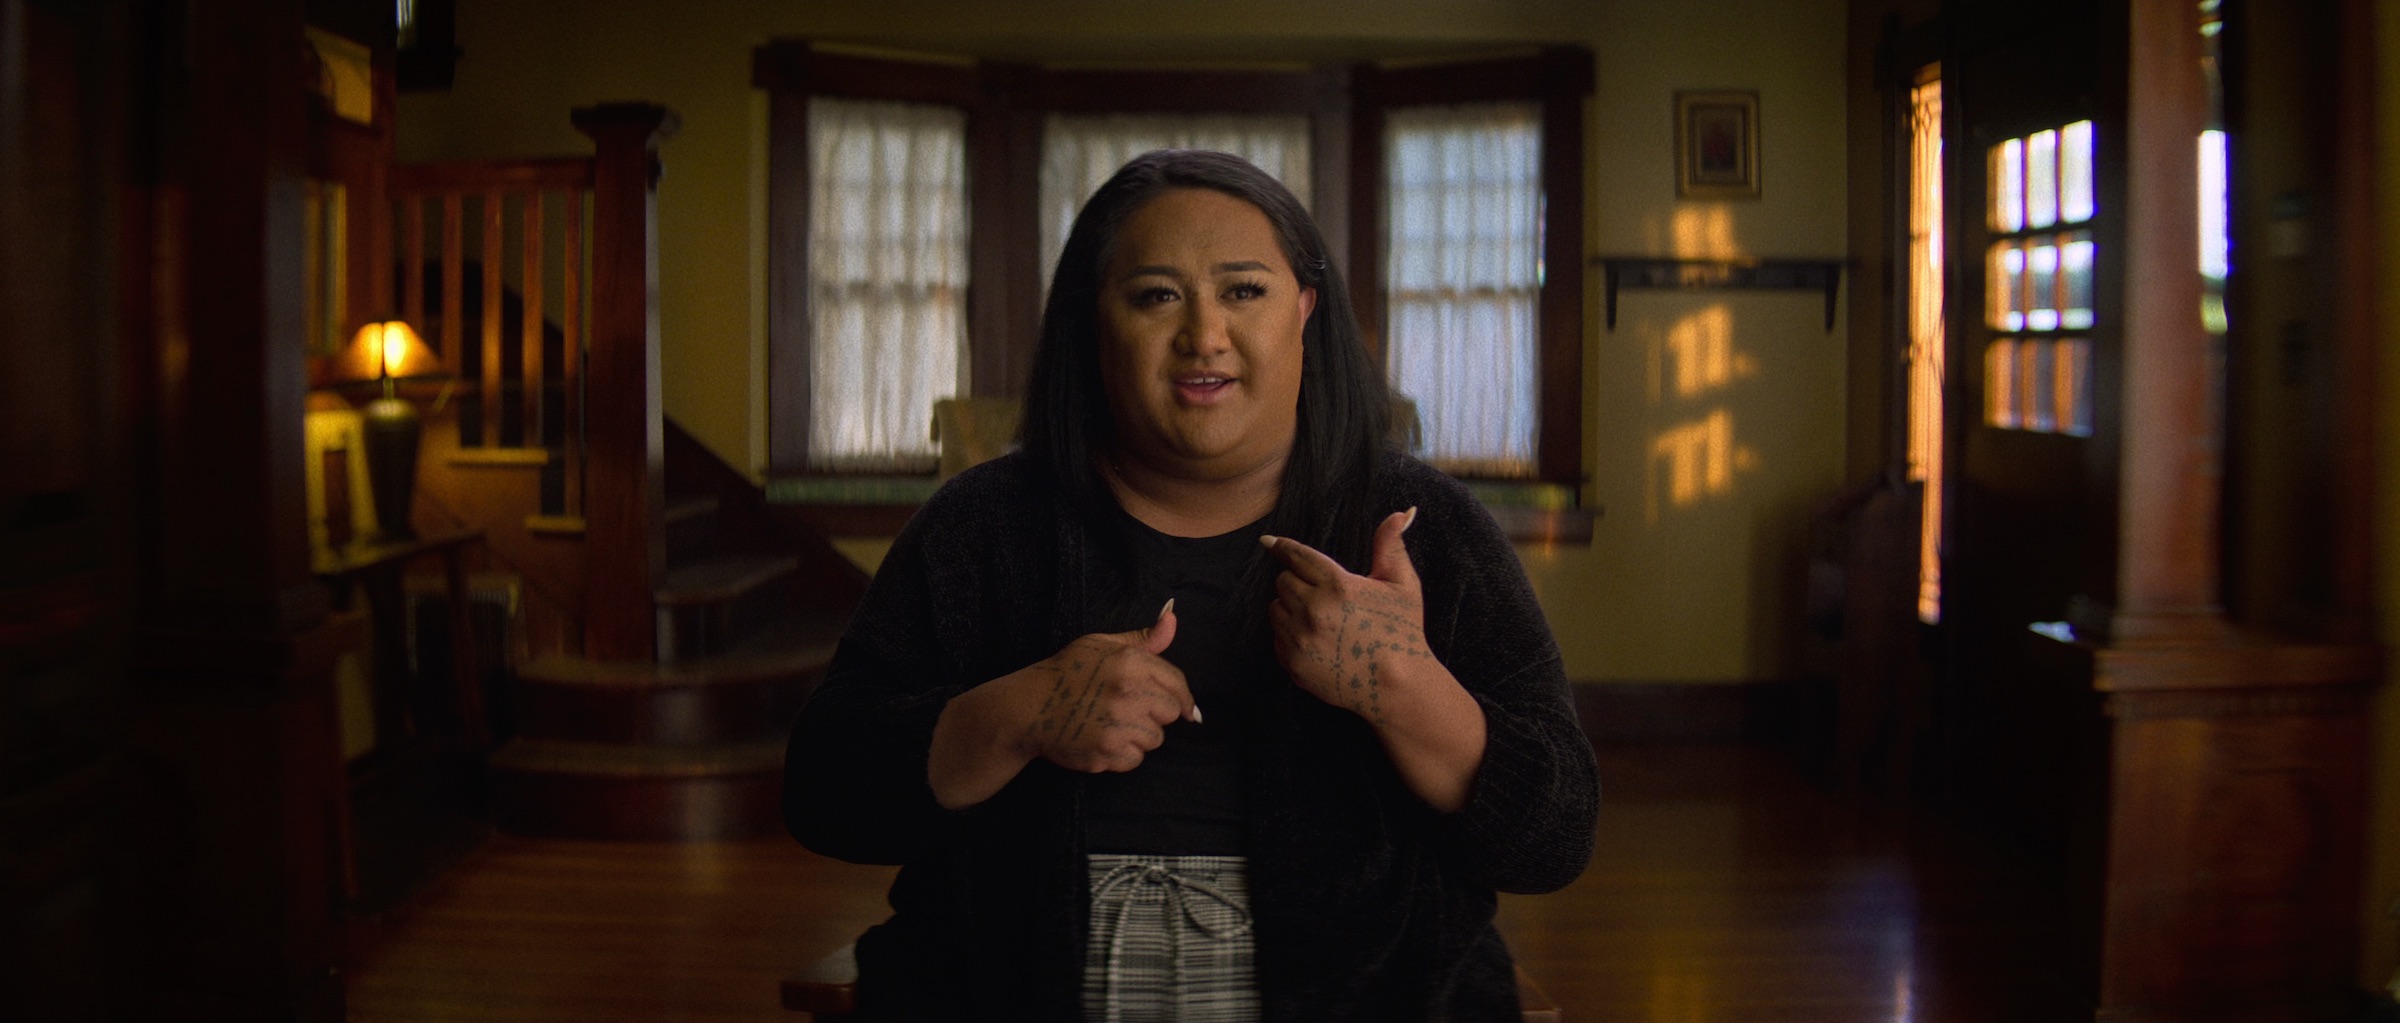 Naya Tuiasosopo, in a still from 'Untold.' Tuiasosopo developed an online identity as Kekua and carried on a relationship with T'eo (Courtesy of Netflix)